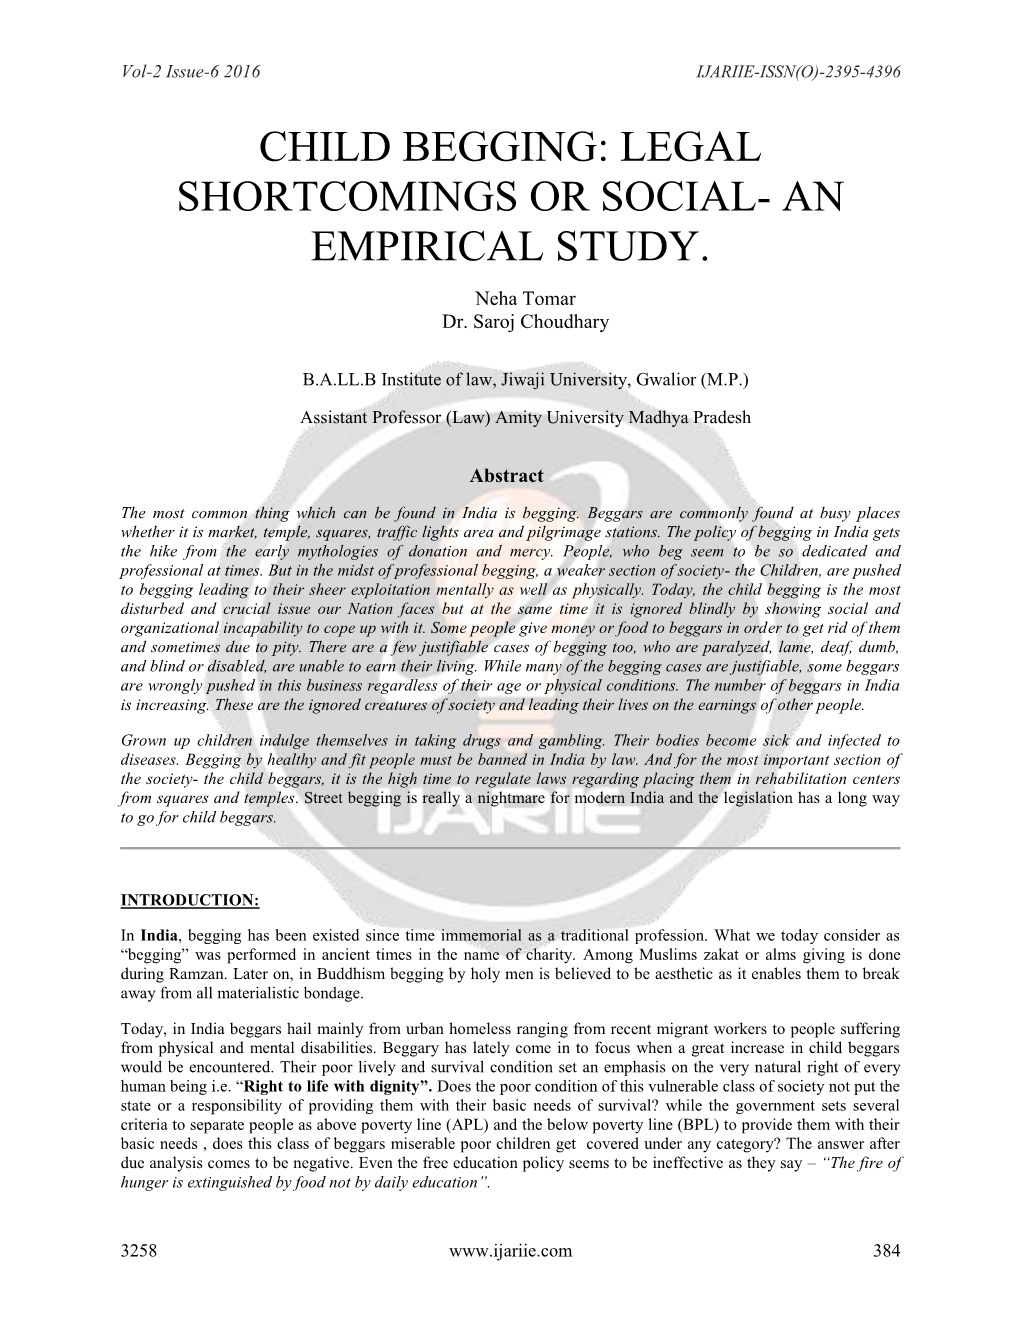 Child Begging: Legal Shortcomings Or Social- an Empirical Study